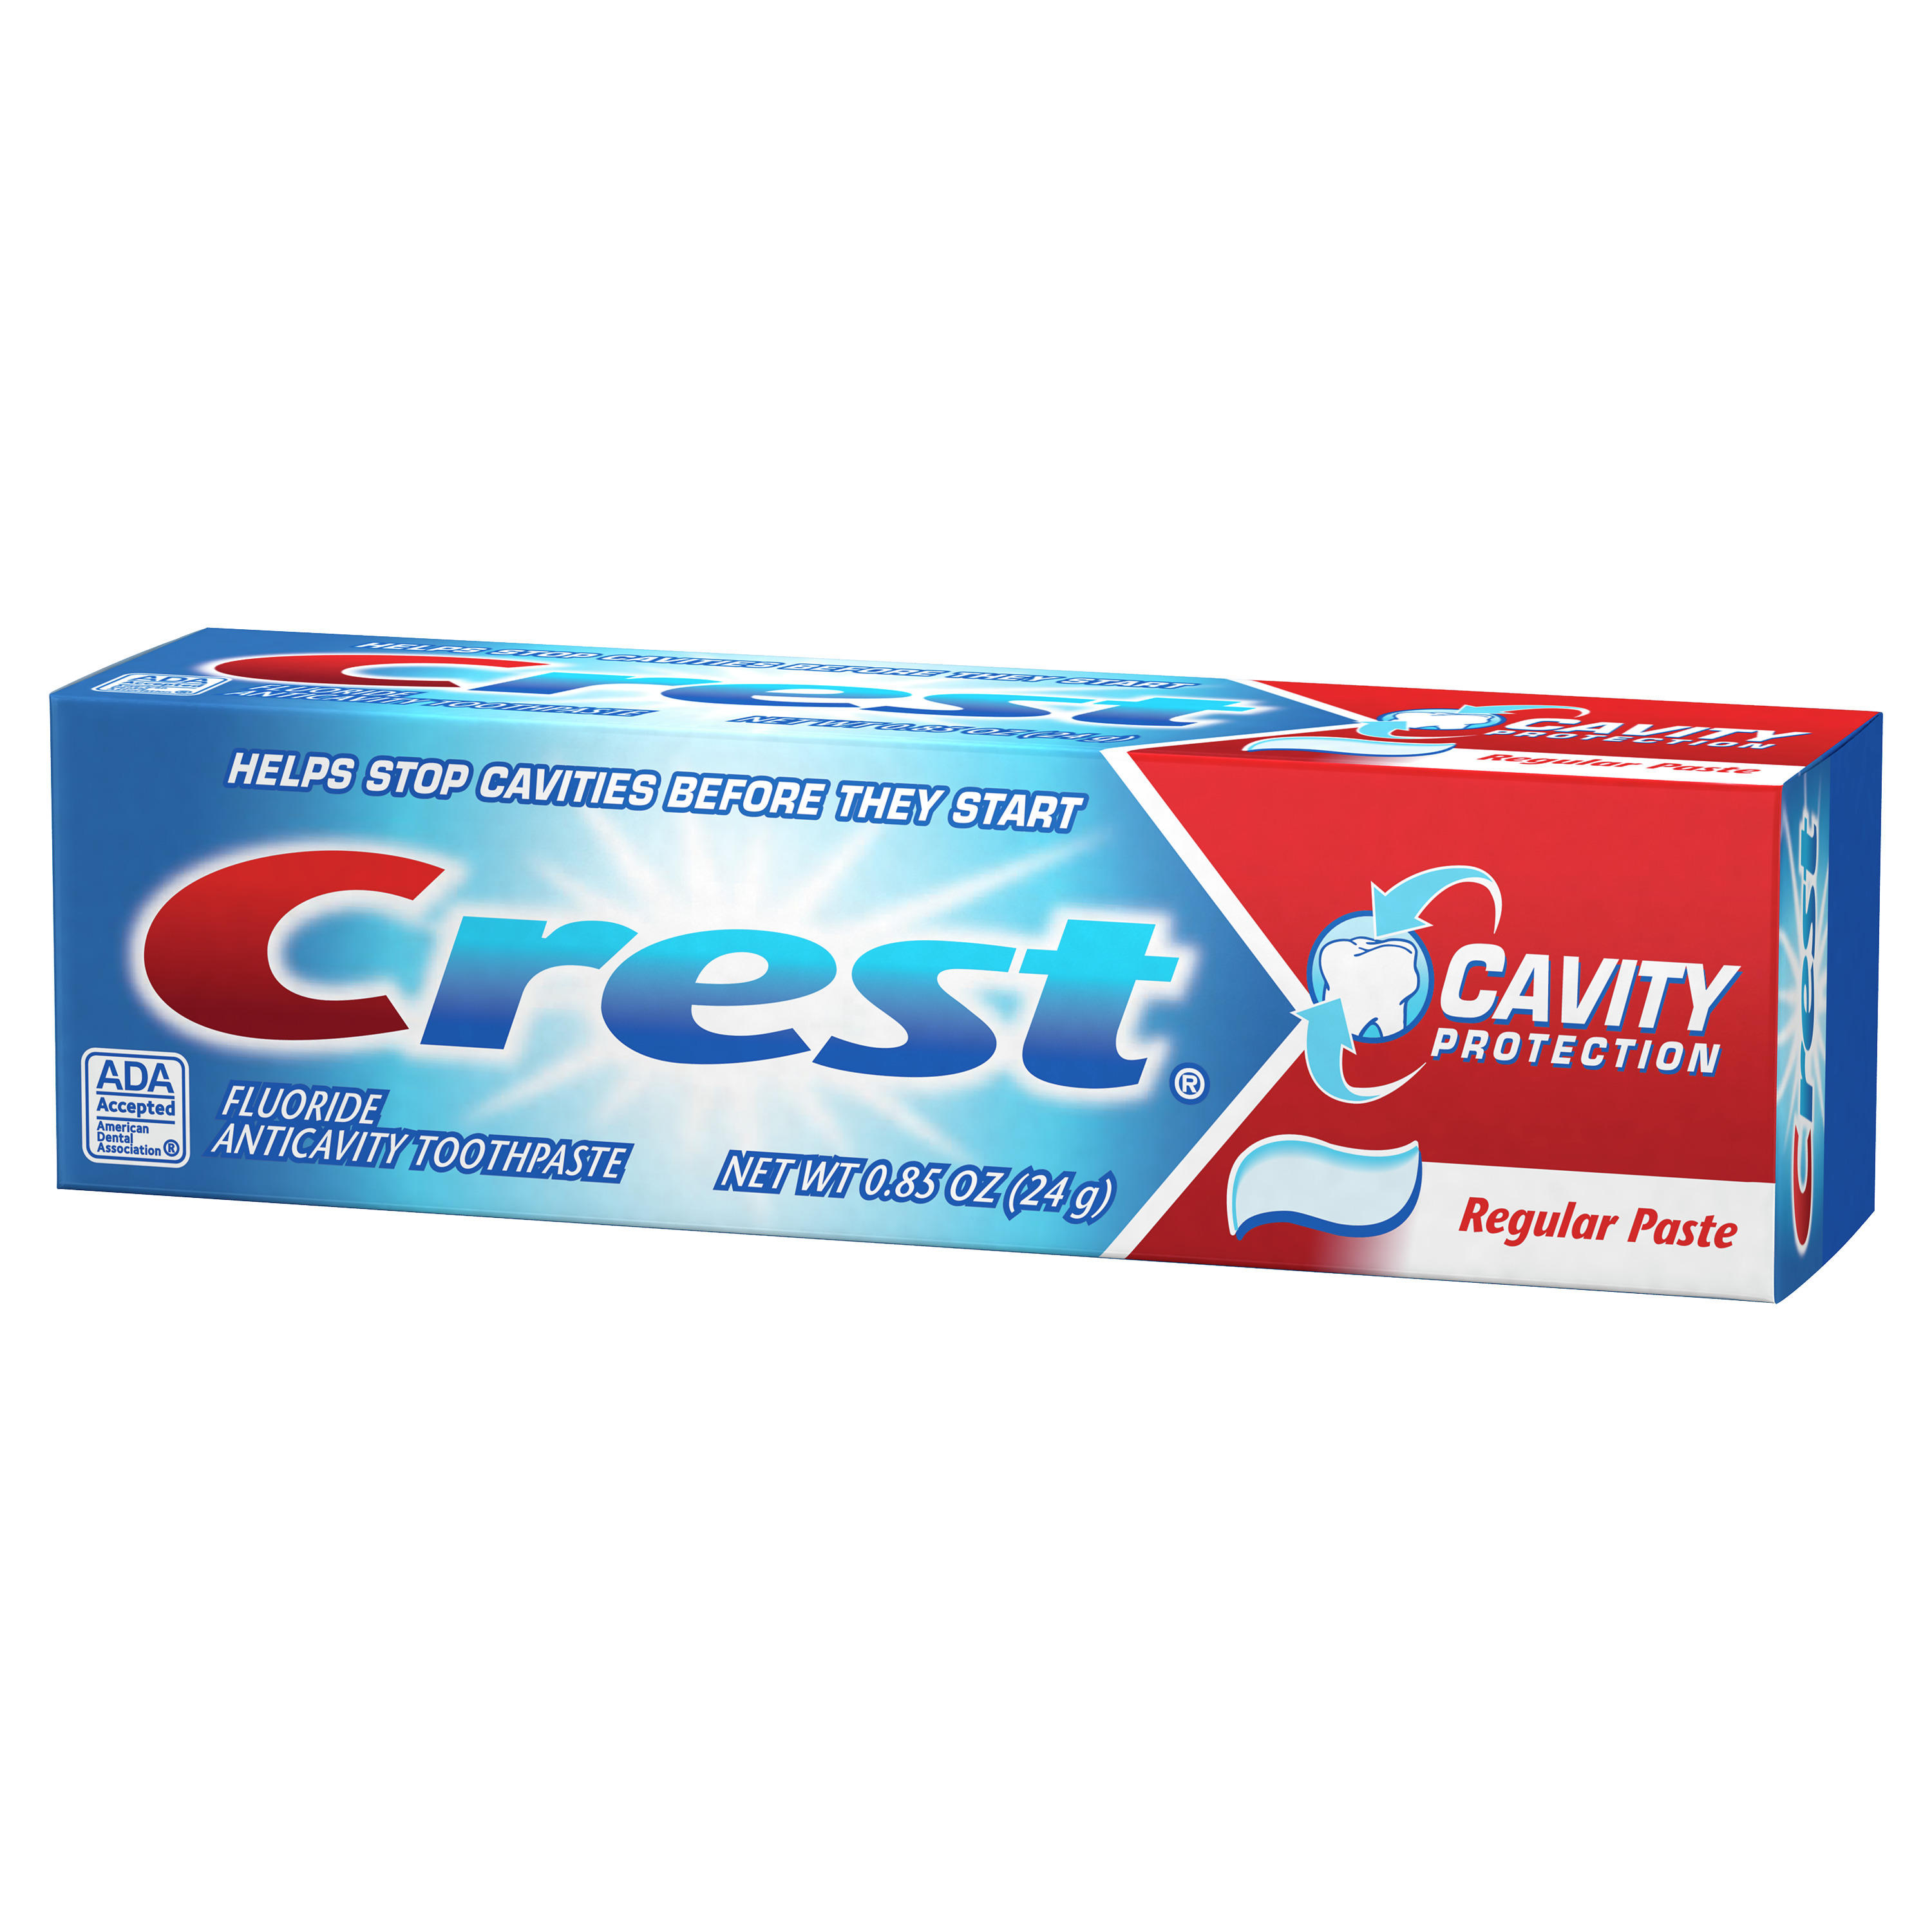 Crest Cavity Protection Toothpaste, Regular, 0.85 oz - image 4 of 5